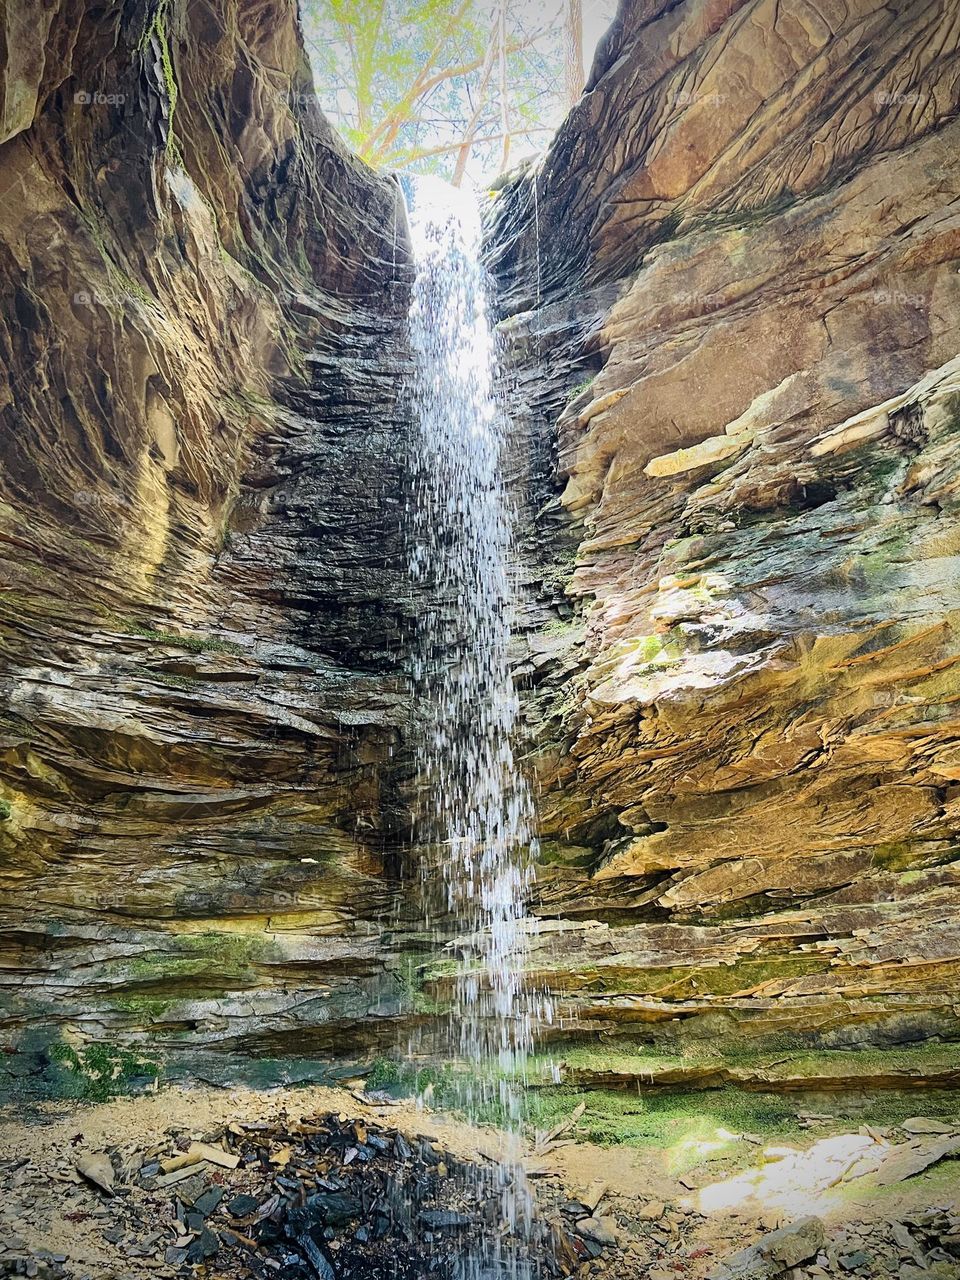 Looking up at a waterfall inside a small canyon. Millions of years of sedimentary rock surround the water.